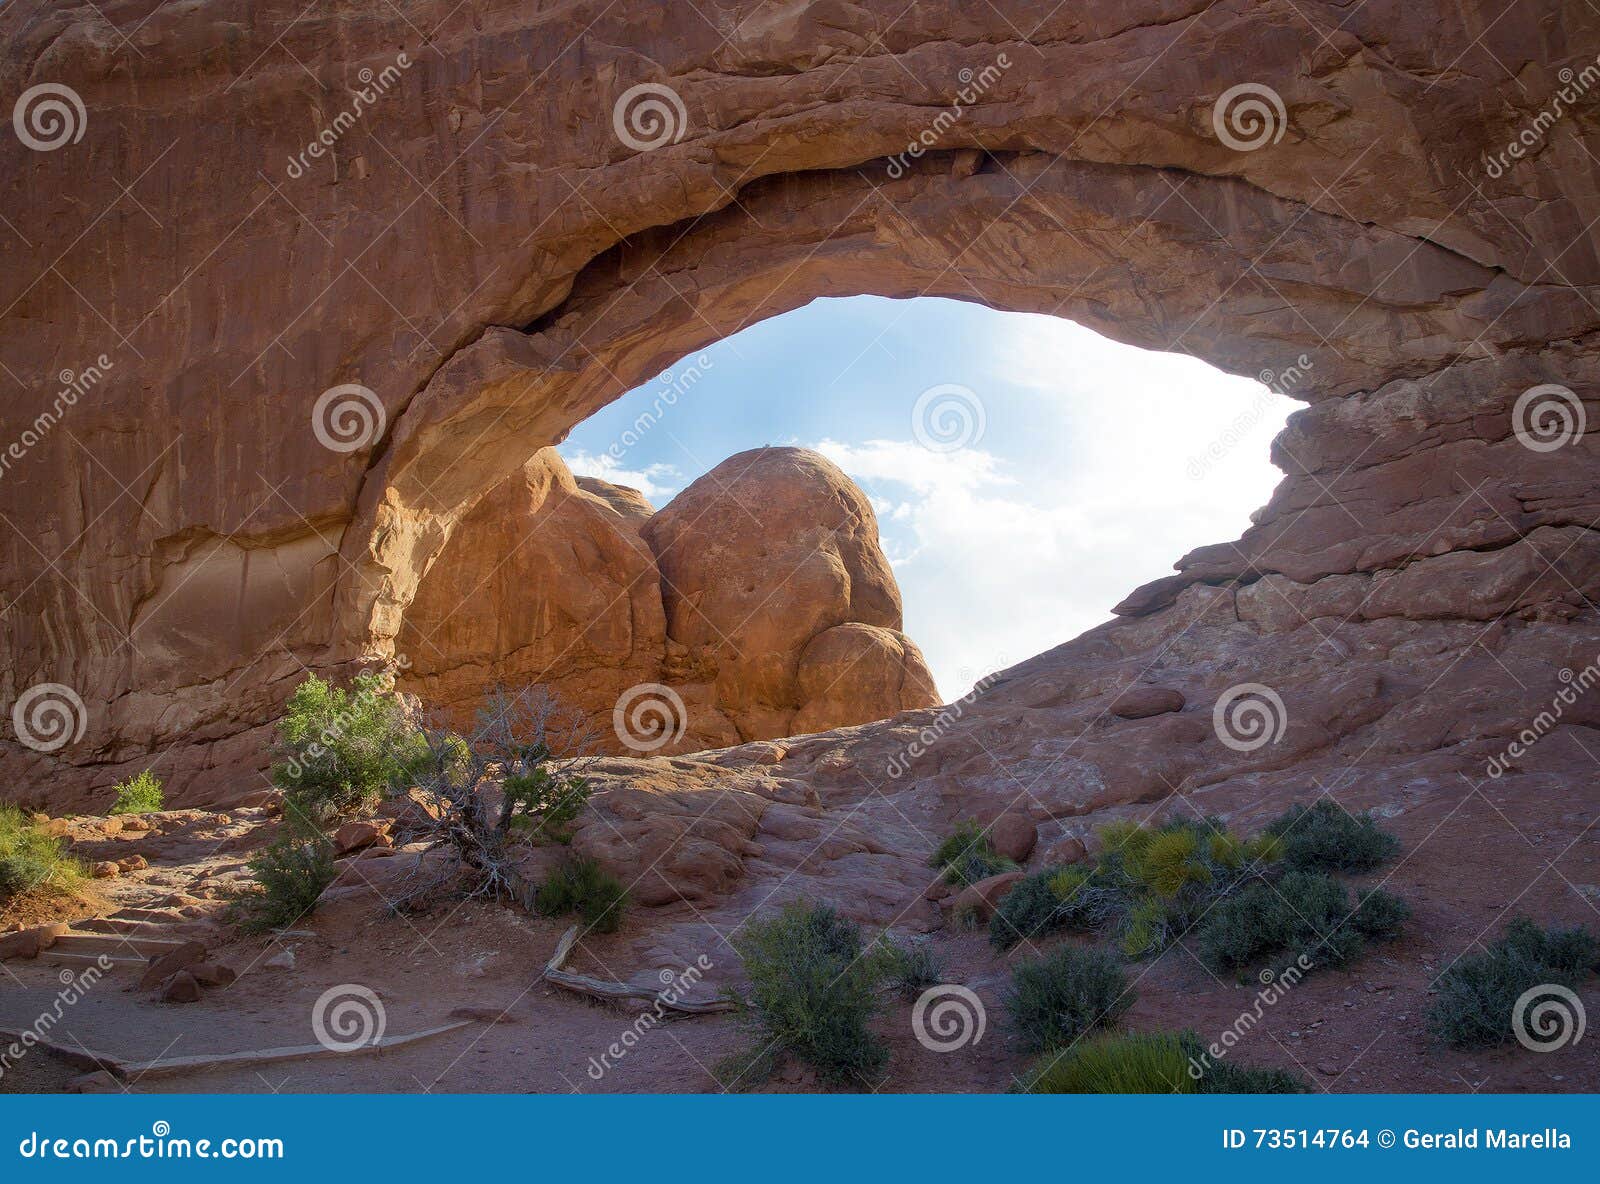 North Window, Arches National Park, Moab Utah. North Window under a cloudy blue sky at Arches National Park in Moab Utah